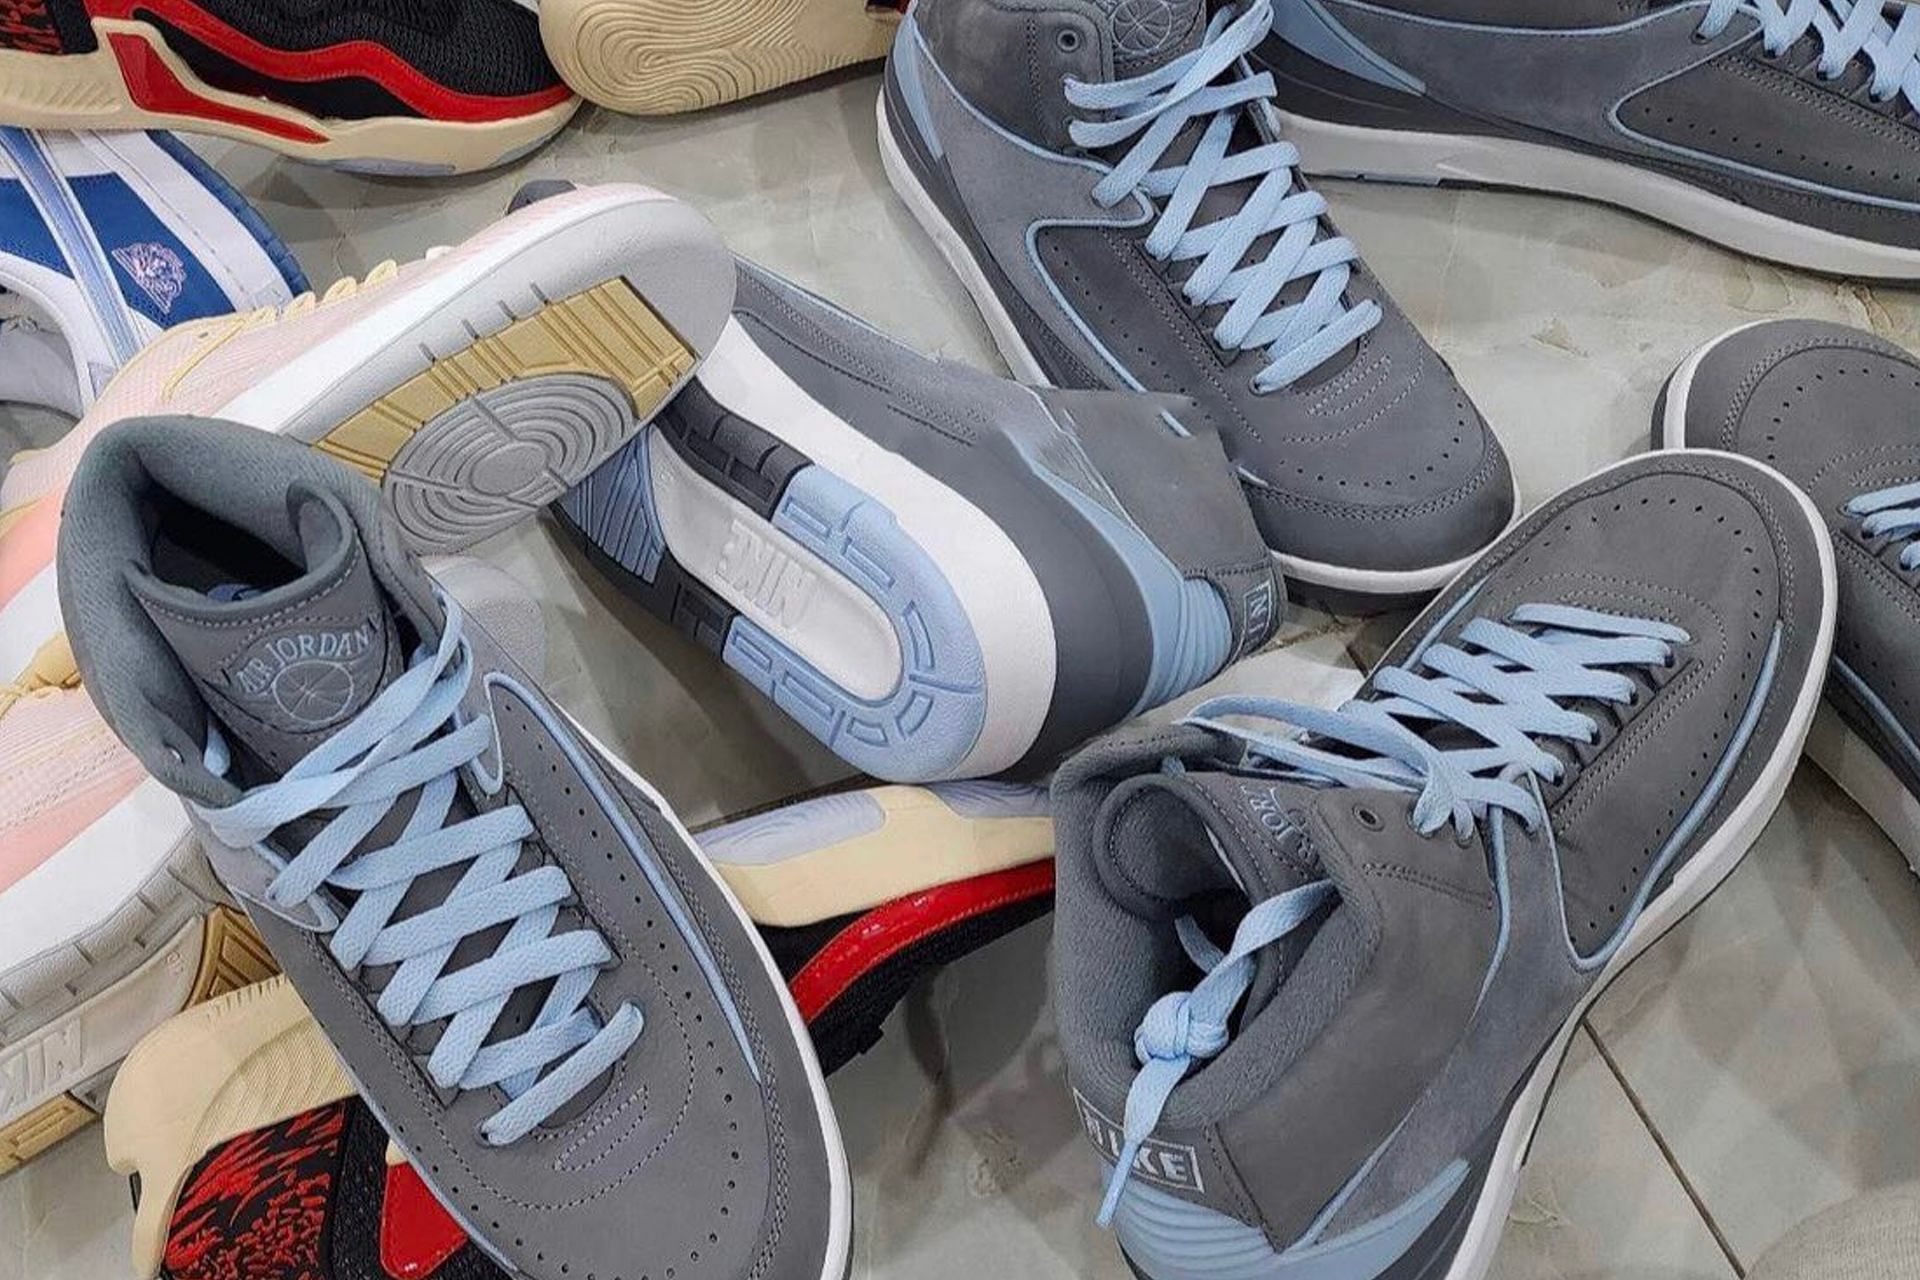 The upcoming Nike Air Jordan 2 Retro &quot;Cool Grey&quot; sneakers will be launched in women&#039;s sizes (Image via @bigbucciband / Twitter)